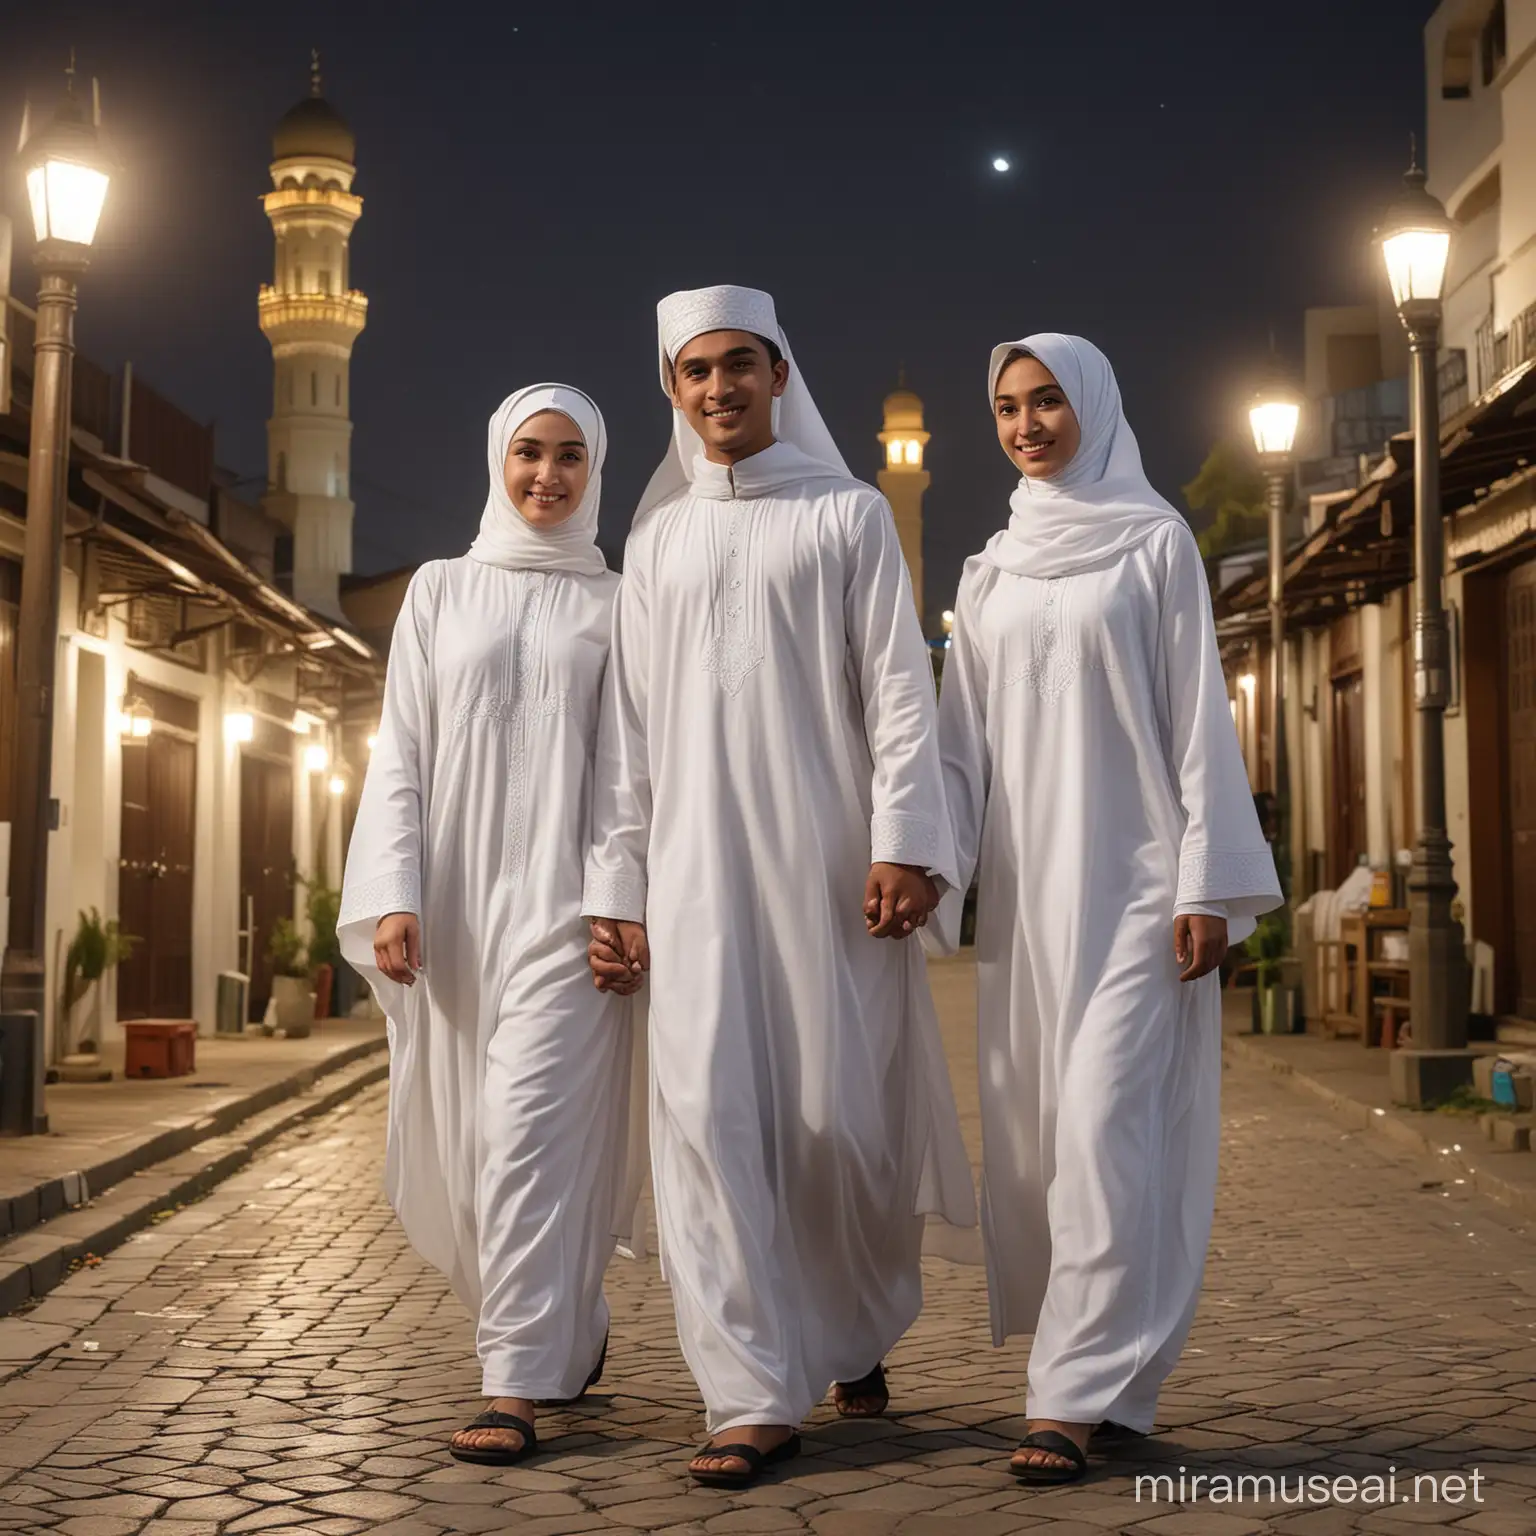 Indonesian Youths in Traditional Muslim Attire Walking to Mosque at Night